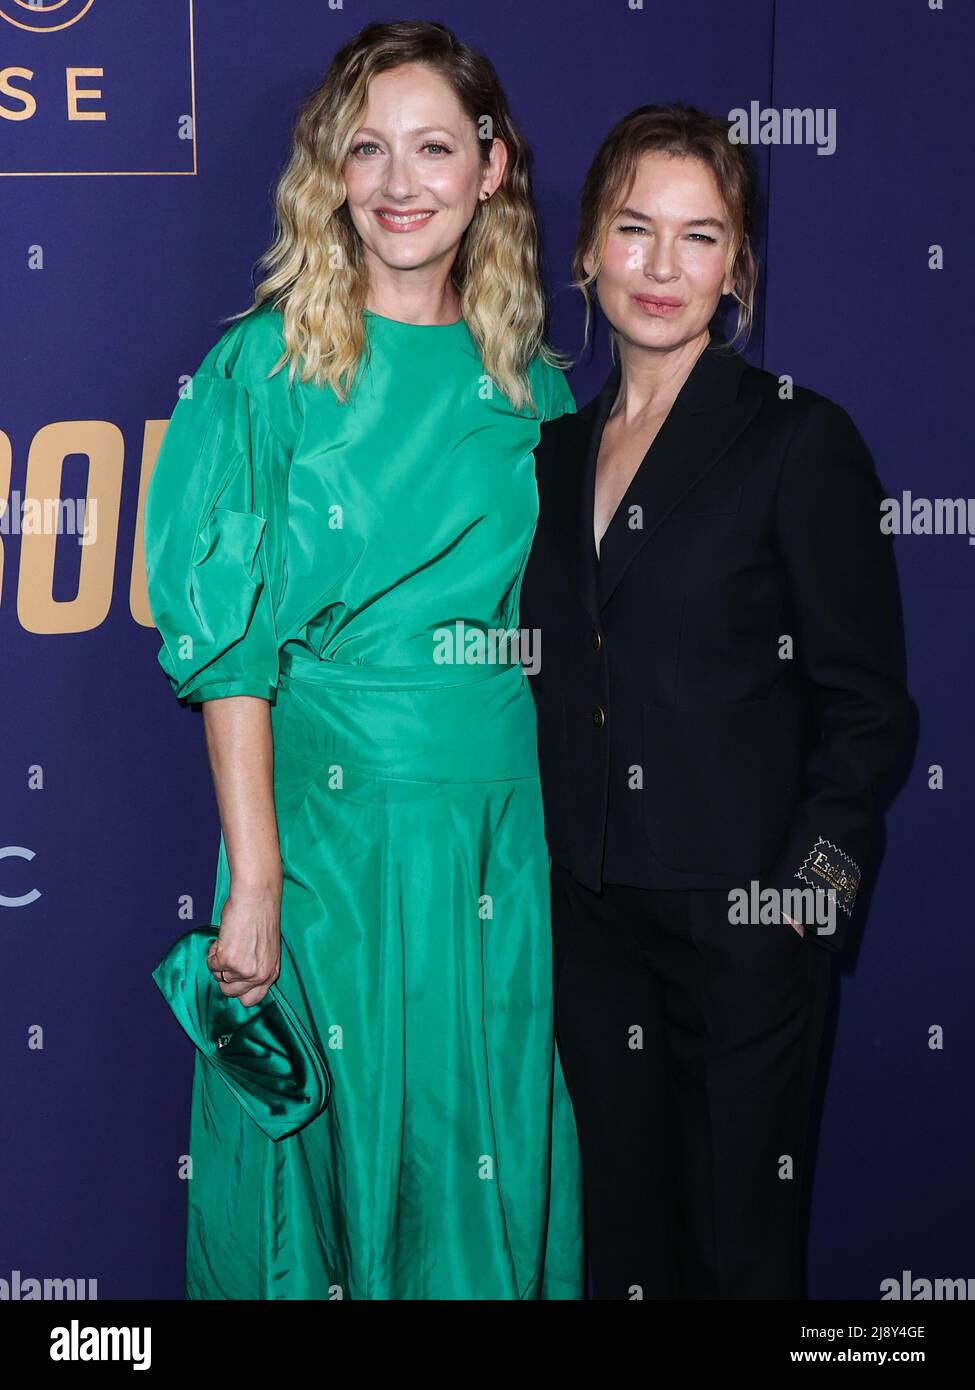 HOLLYWOOD, LOS ANGELES, CALIFORNIA, USA - MAY 18: American actresses Judy Greer and Renée Zellweger (Renee Zellweger) arrive at NBCUniversal's FYC Event For 'The Thing About Pam' held at the NBCU FYC House on May 18, 2022 in Hollywood, Los Angeles, California, United States. (Photo by Xavier Collin/Image Press Agency) Stock Photo